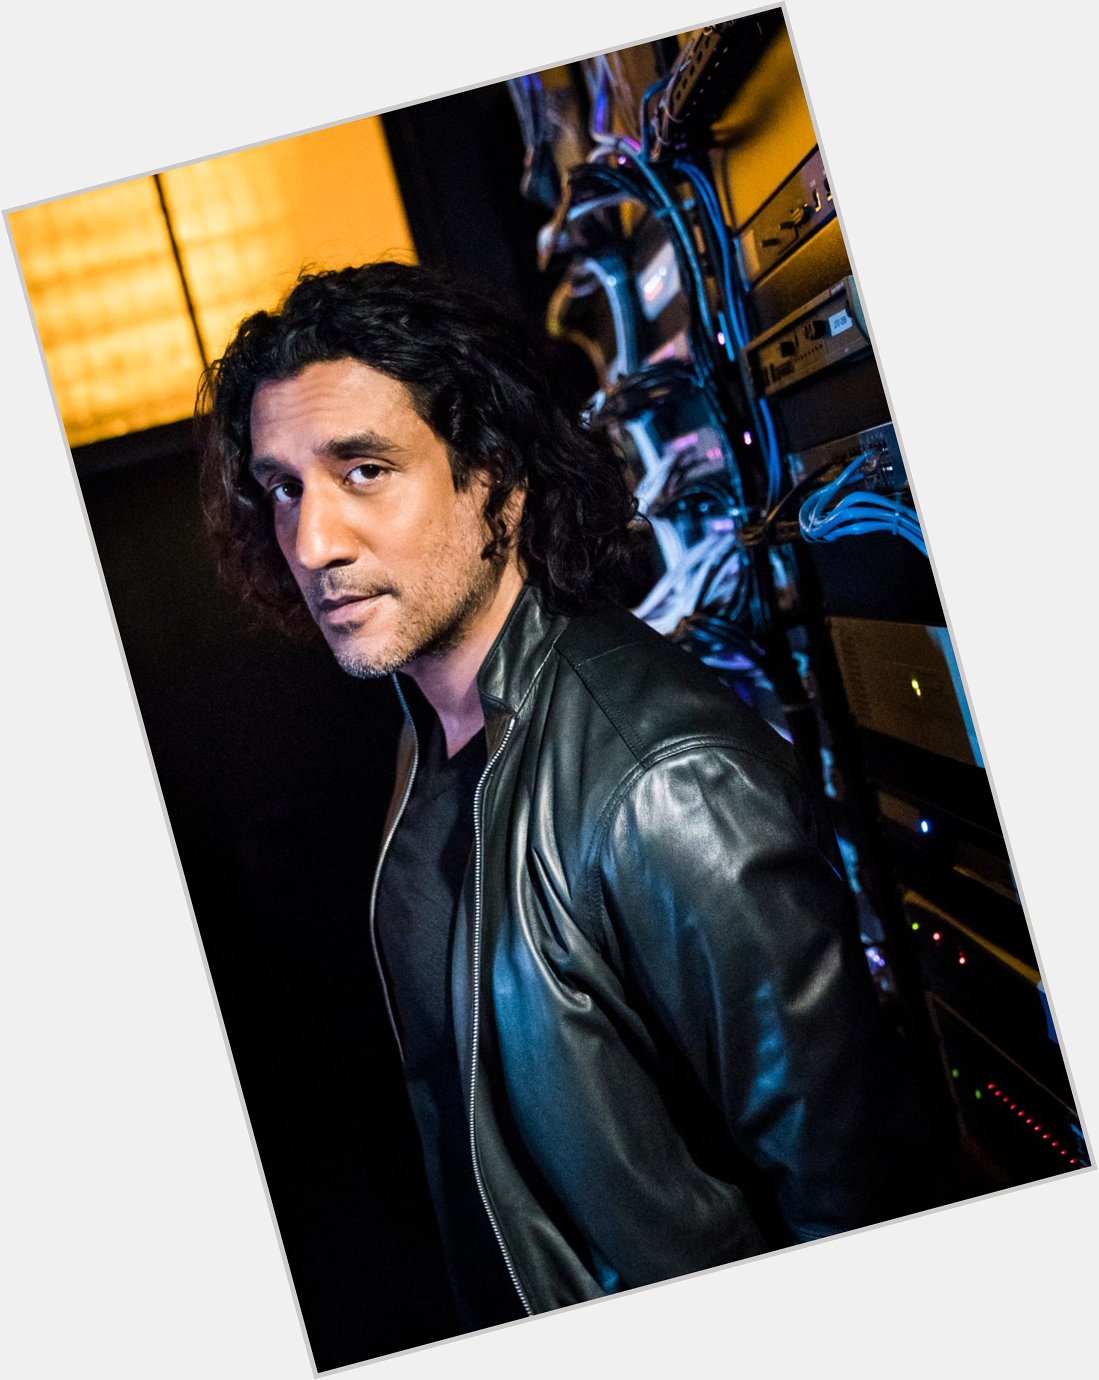 Join us in wishing Naveen Andrews a very happy birthday! 